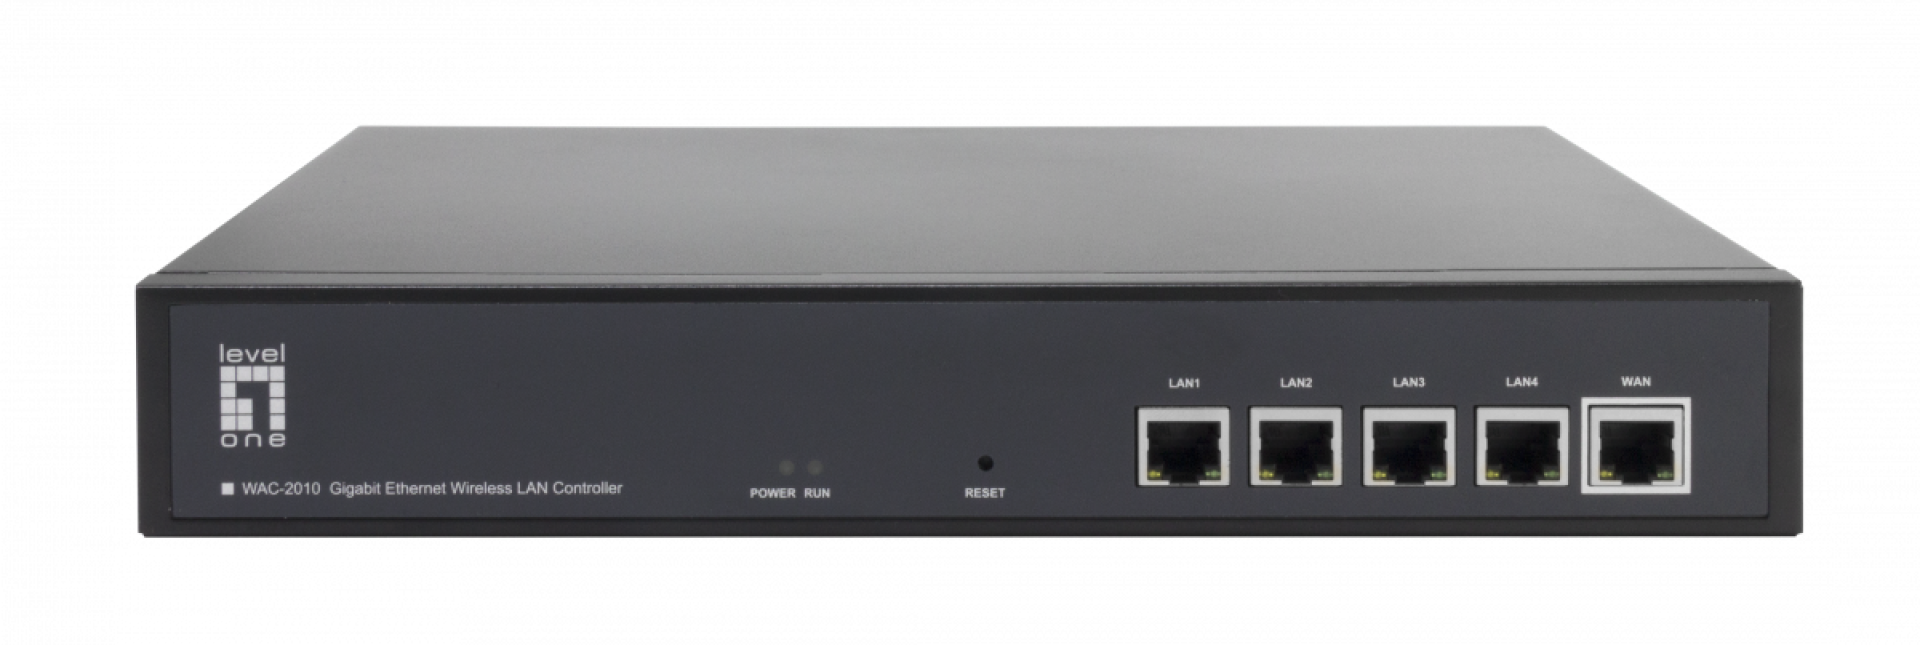 Gigabit WLAN controller for up to 128 APs